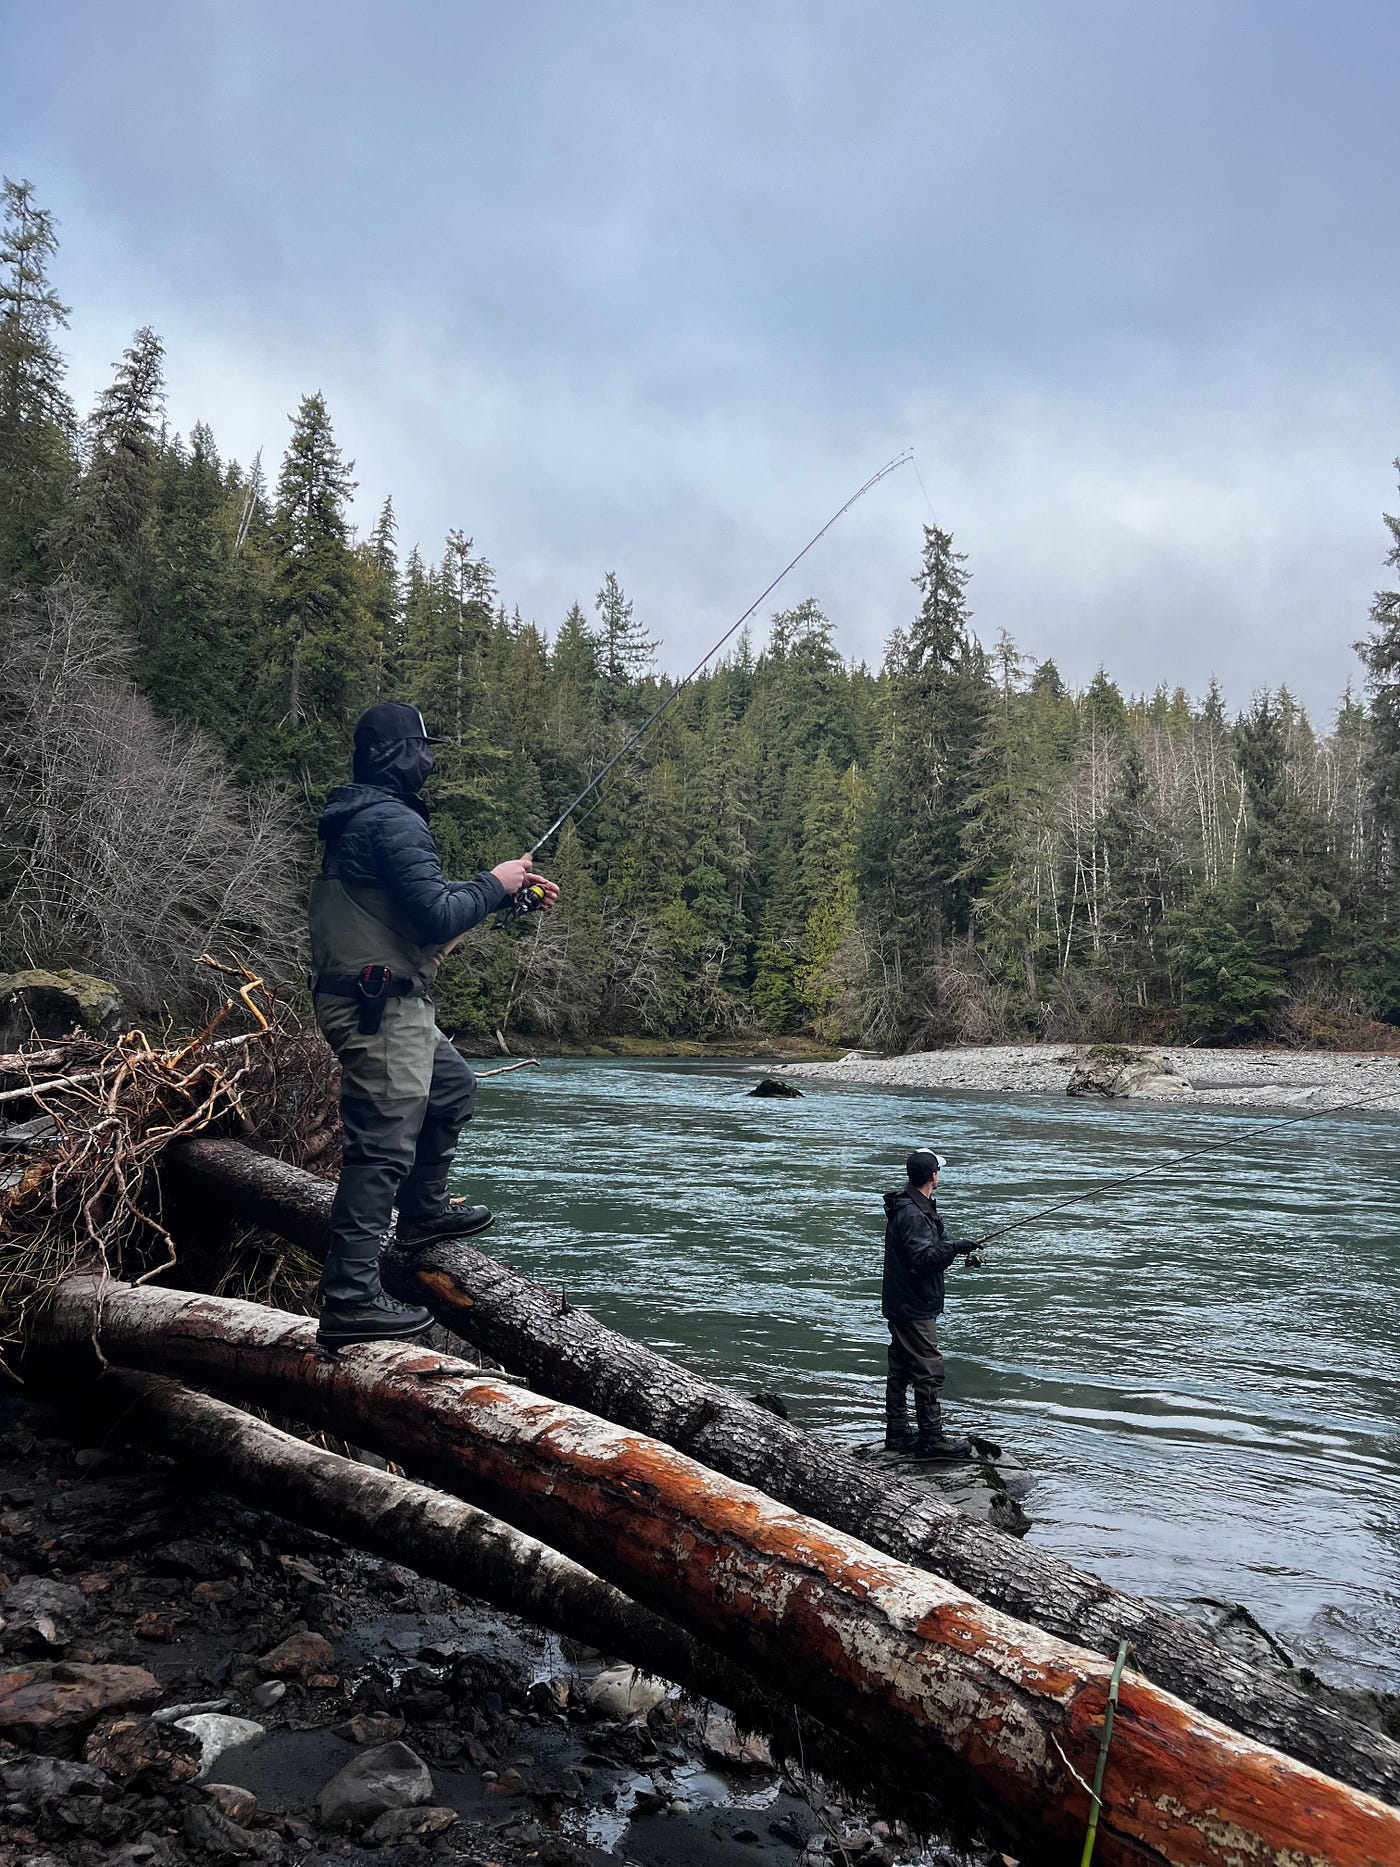 Hoh River study: Does fishing from a boat affect wild steelhead catch?, by  The Washington Department of Fish and Wildlife